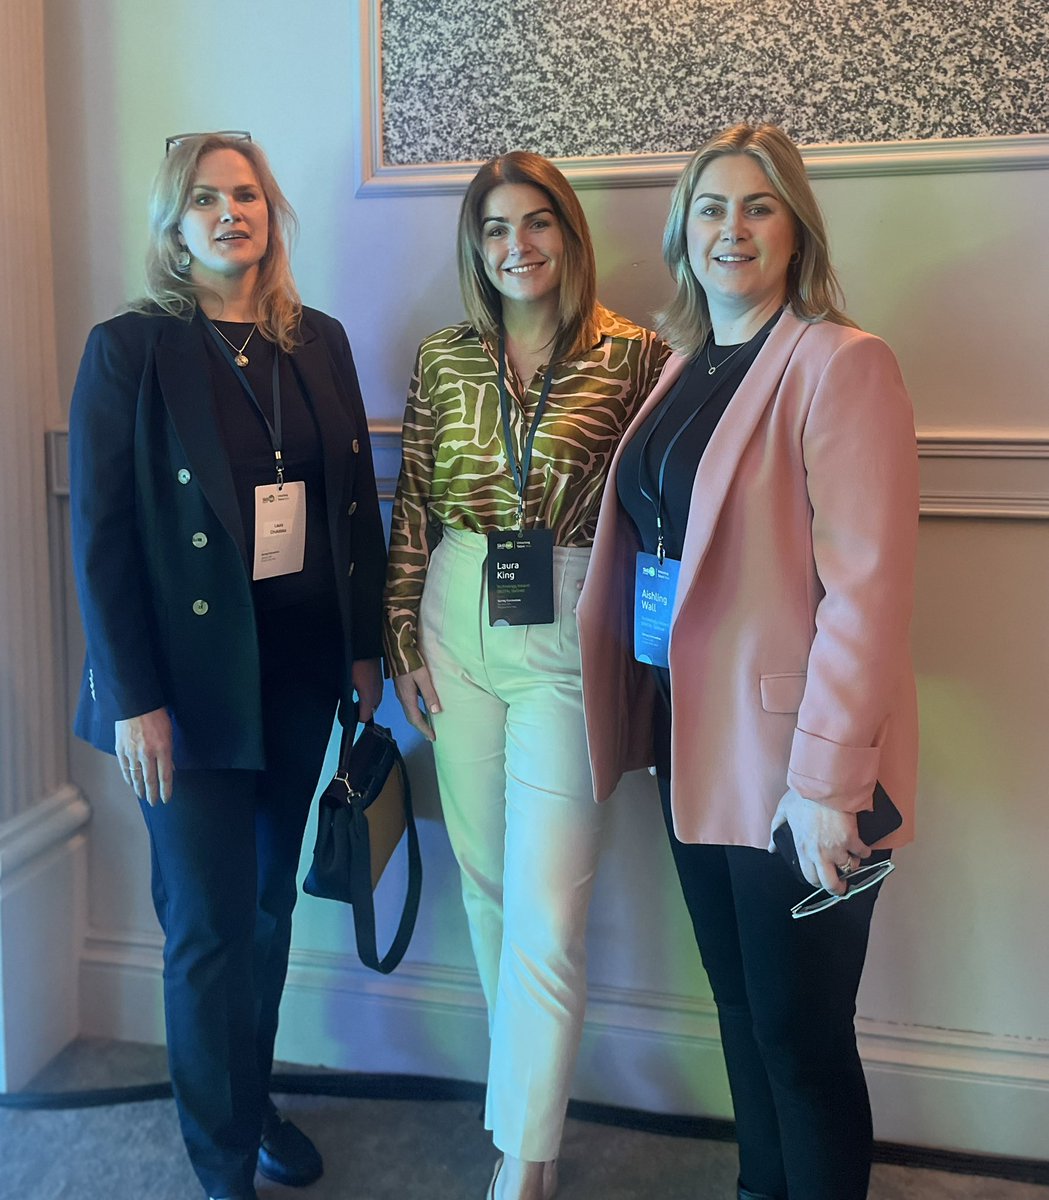 If you’re here at @SkillnetIreland’s ‘Unlocking Talent Now’ Spring Convention, say hello to Laura D, Laura K & Aishling from @DigitalSkillnet, one of the 70 Skillnet Business Networks across Ireland. We continue to strive to meet the ever-evolving talent development challenges…